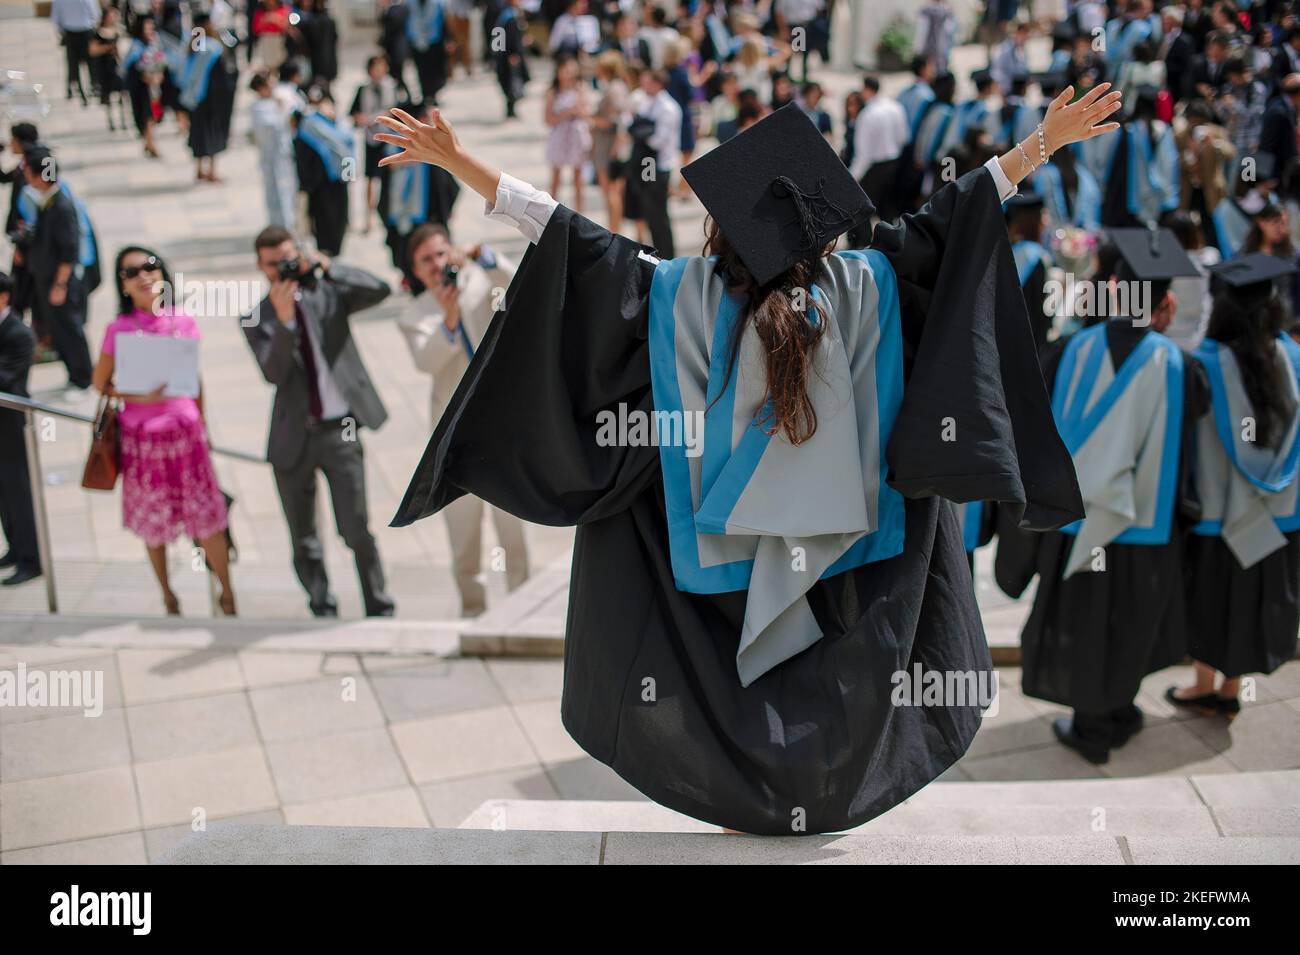 a university student at graduation in cap and gown celebrating passing their degree phd graduating Stock Photo